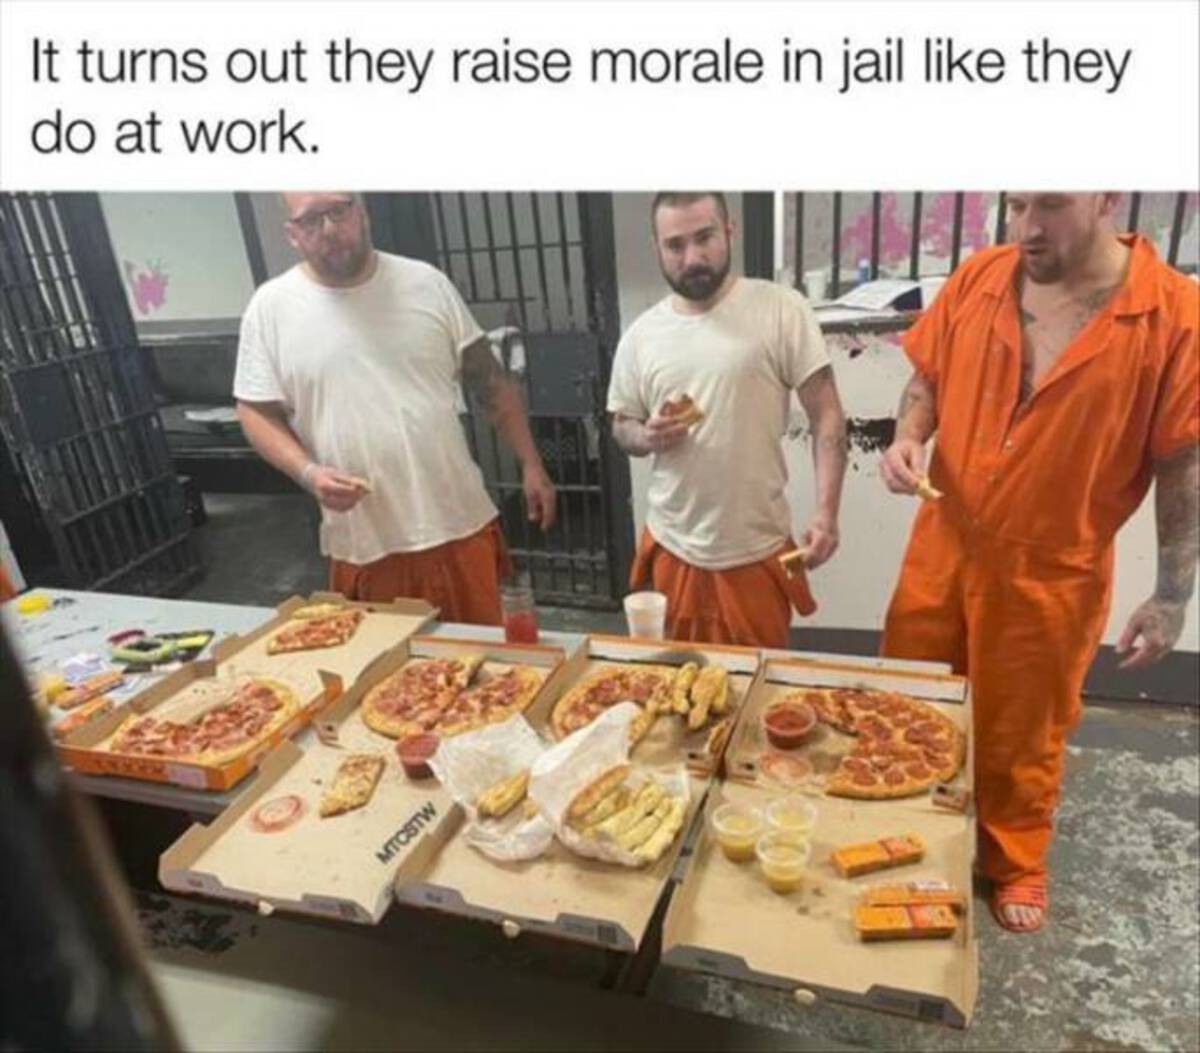 turns out they raise morale in jail like they do at work - It turns out they raise morale in jail they do at work. Mtcstw